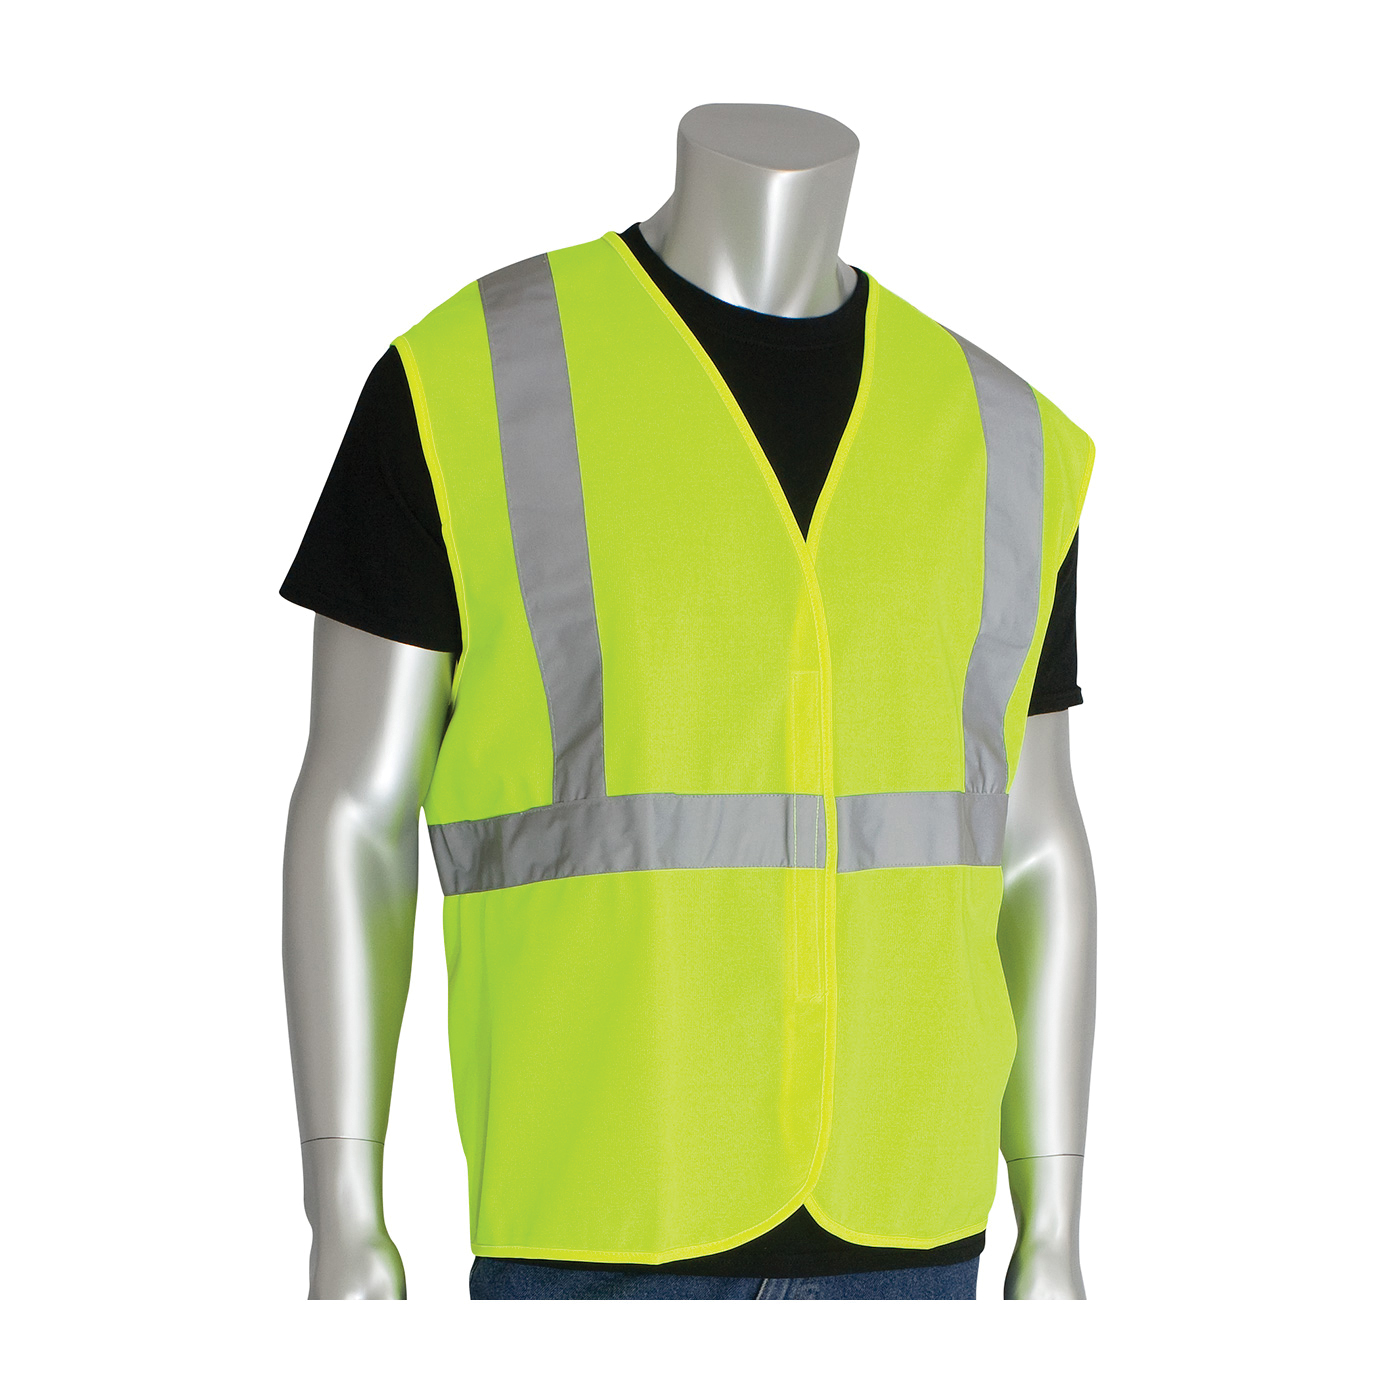 PIP® 302-WCENGLY-XL Solid Vest, XL, Hi-Viz Lime Yellow, Polyester, Hook and Loop Closure, ANSI Class: Class 2, Specifications Met: ANSI 107 Type R